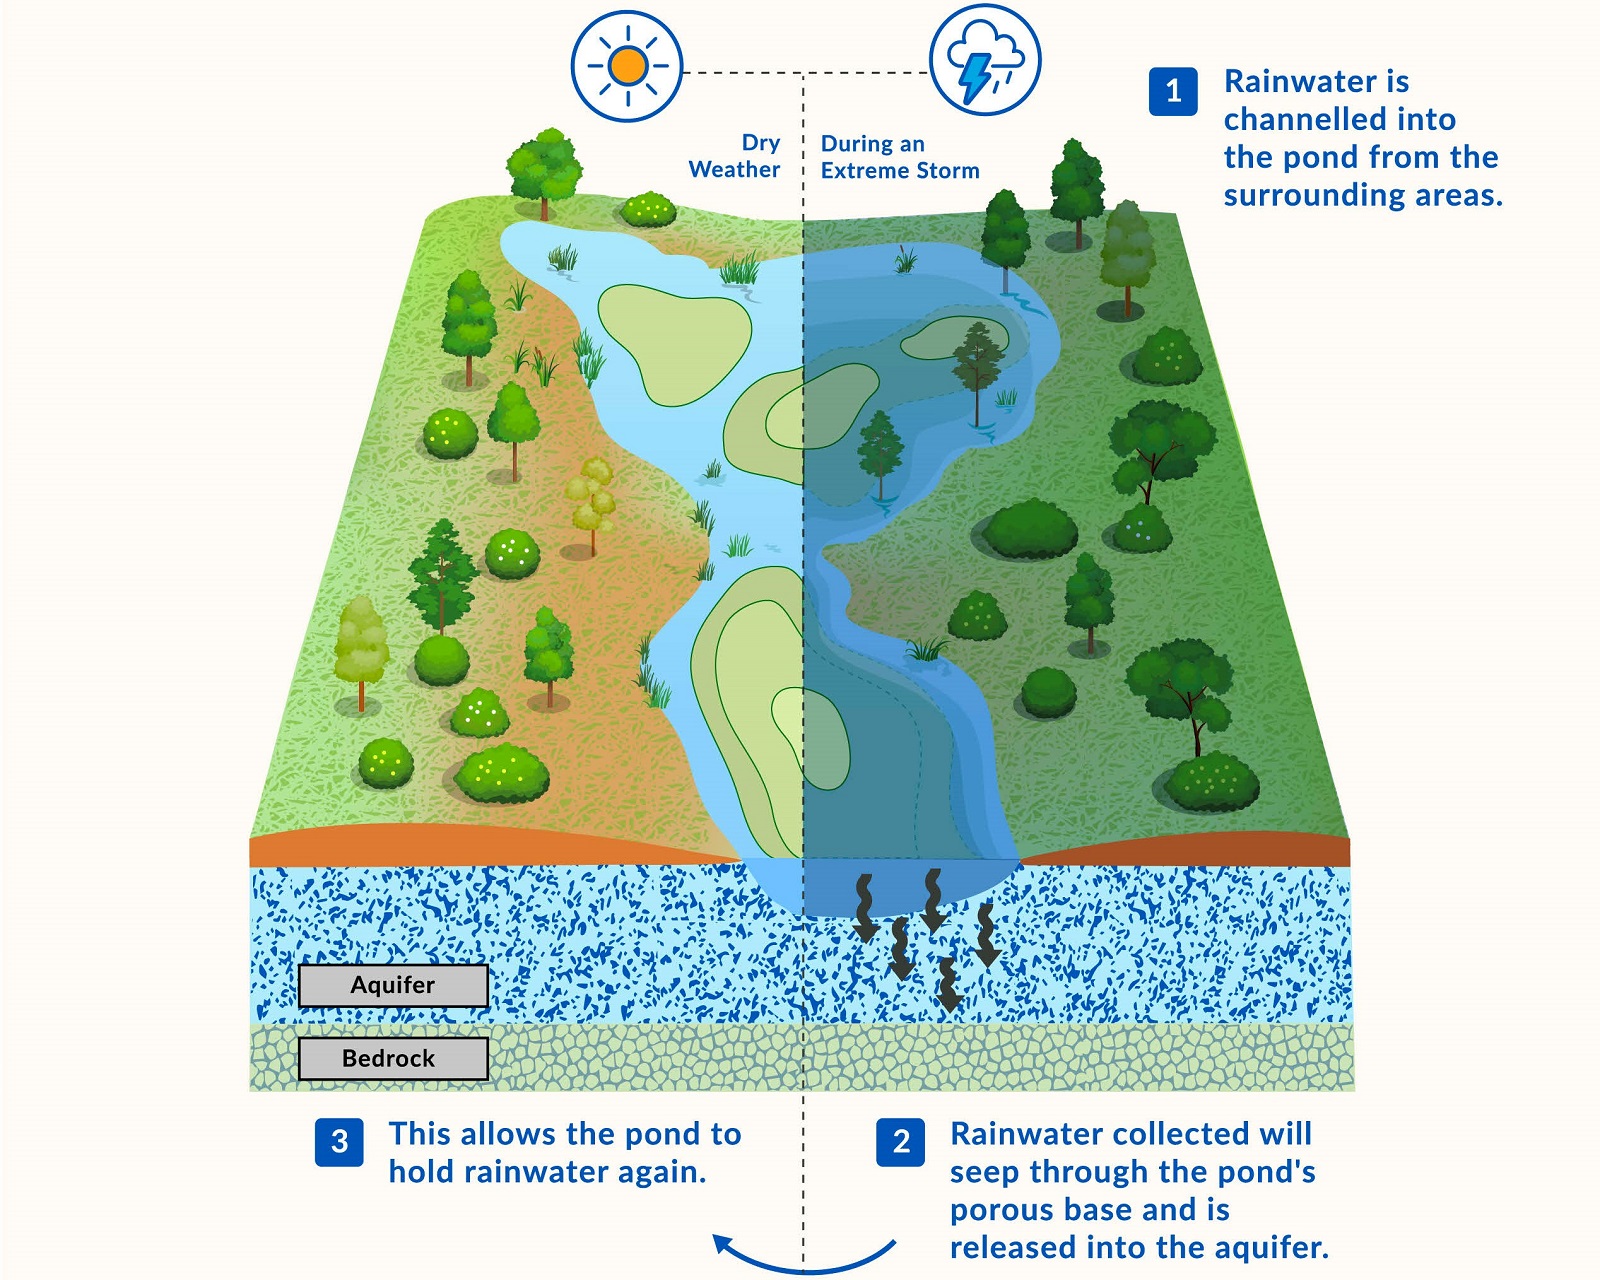 infographic that depicts the working of the jurong island pond